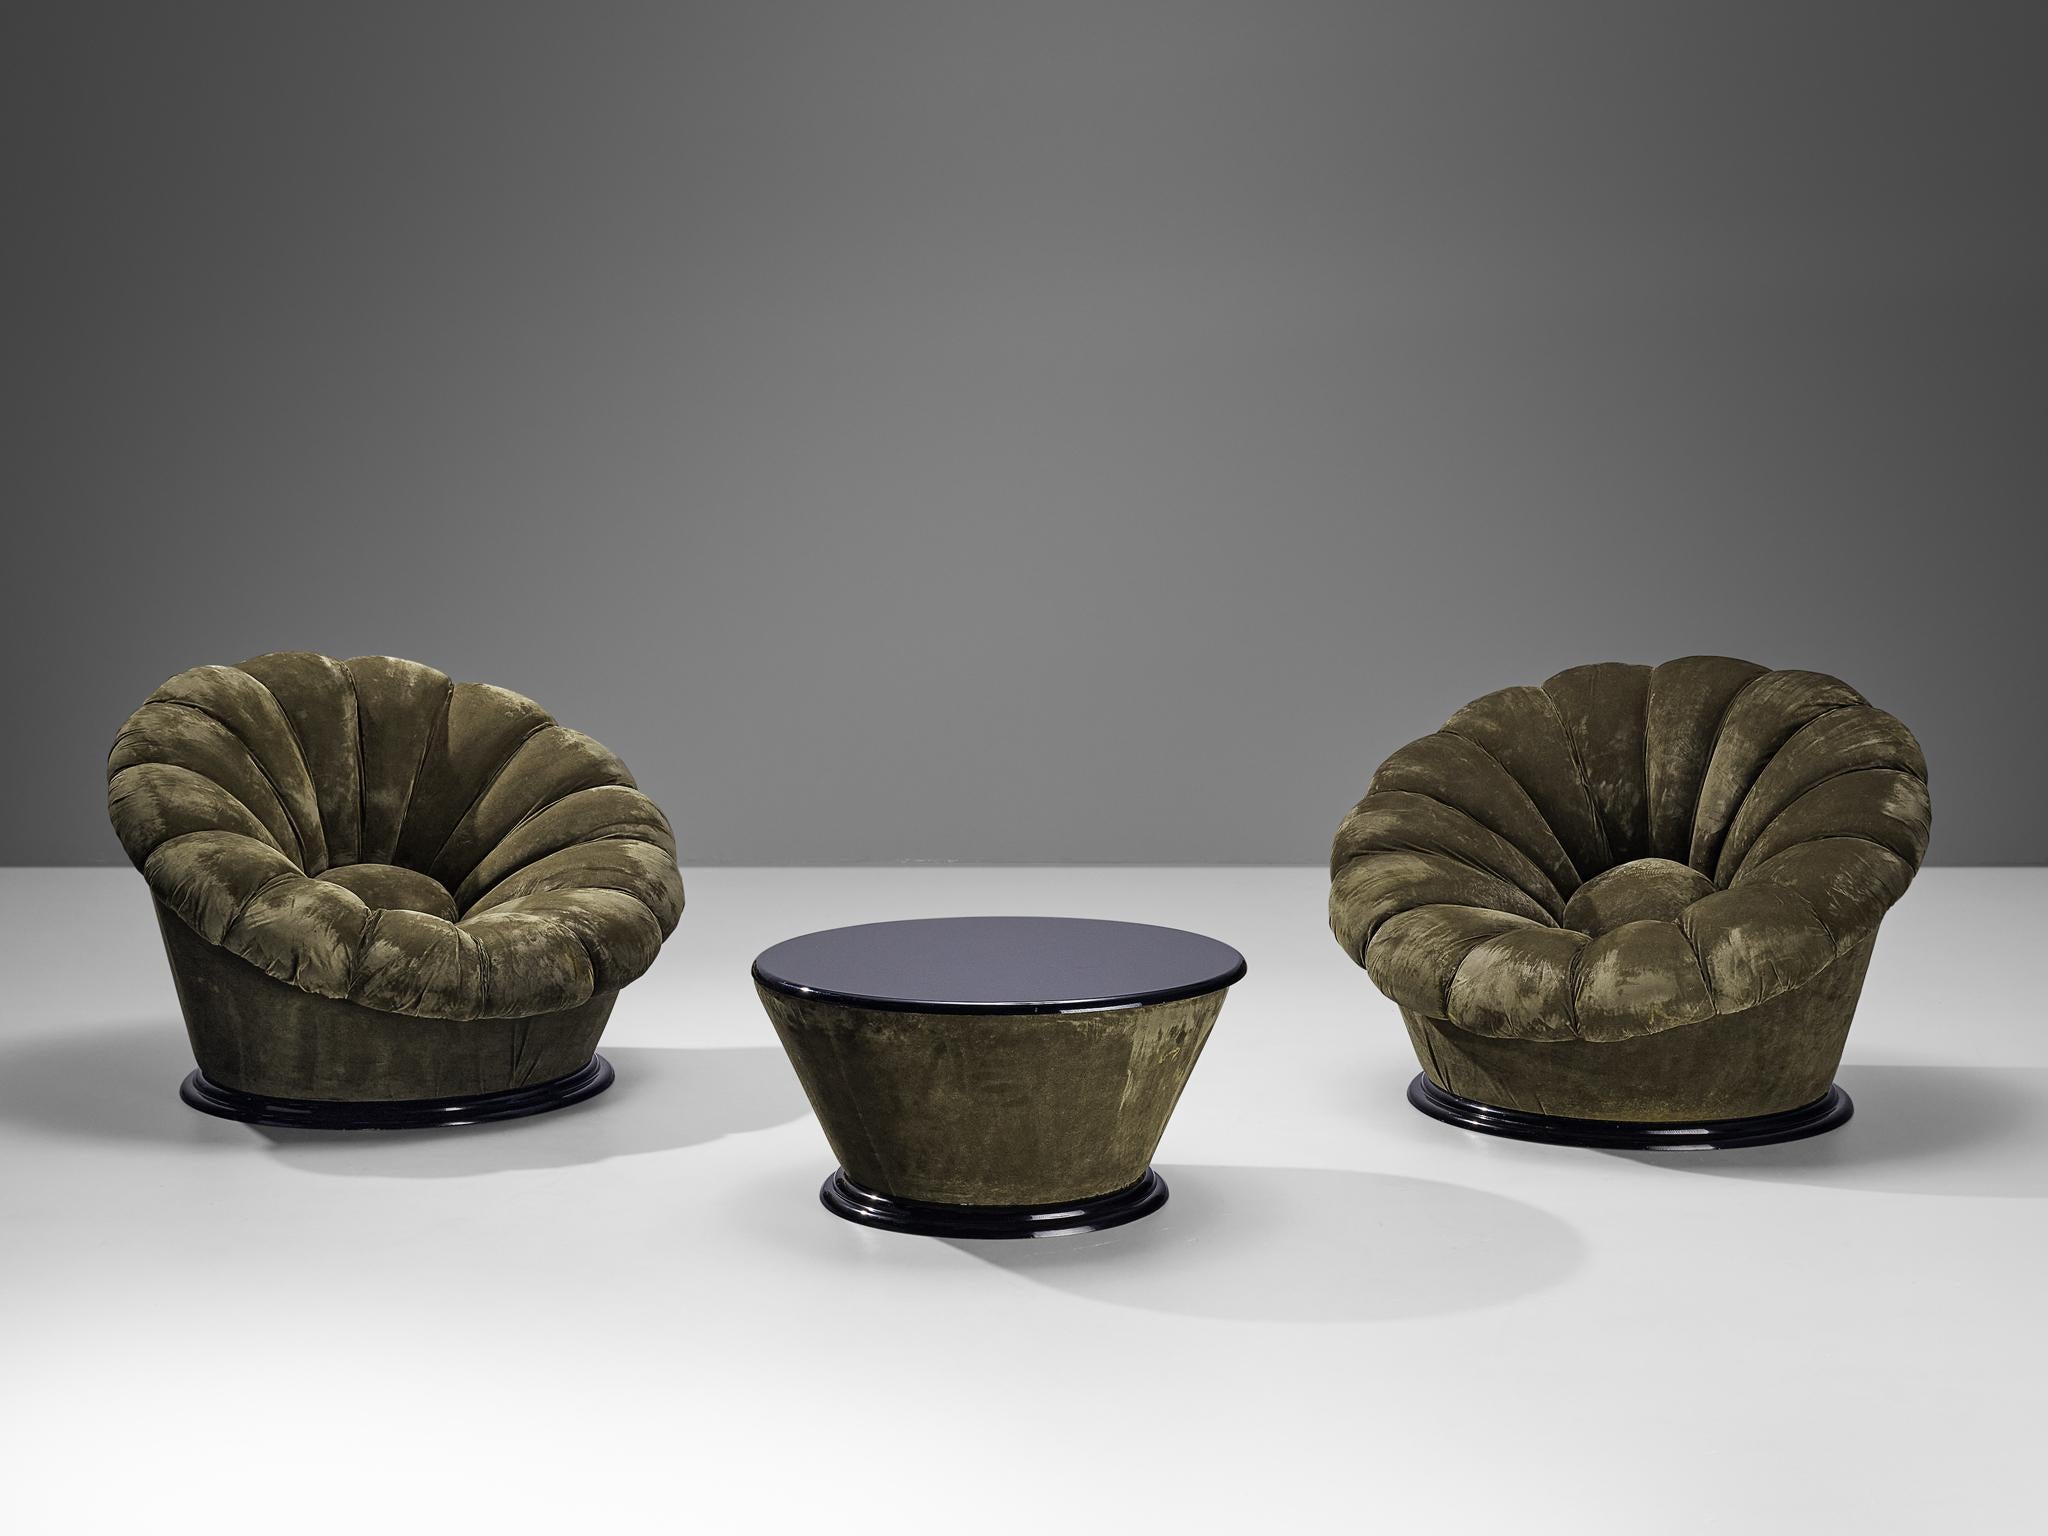 Pair of lounge chairs with coffee table, velvet, lacquered wood, plastic, Italy, 1970s

Eccentric lounge set of Italian origin. The lounge chairs resemble a flower by means of the inward-facing tufted lines and the round centre. The whole unit is